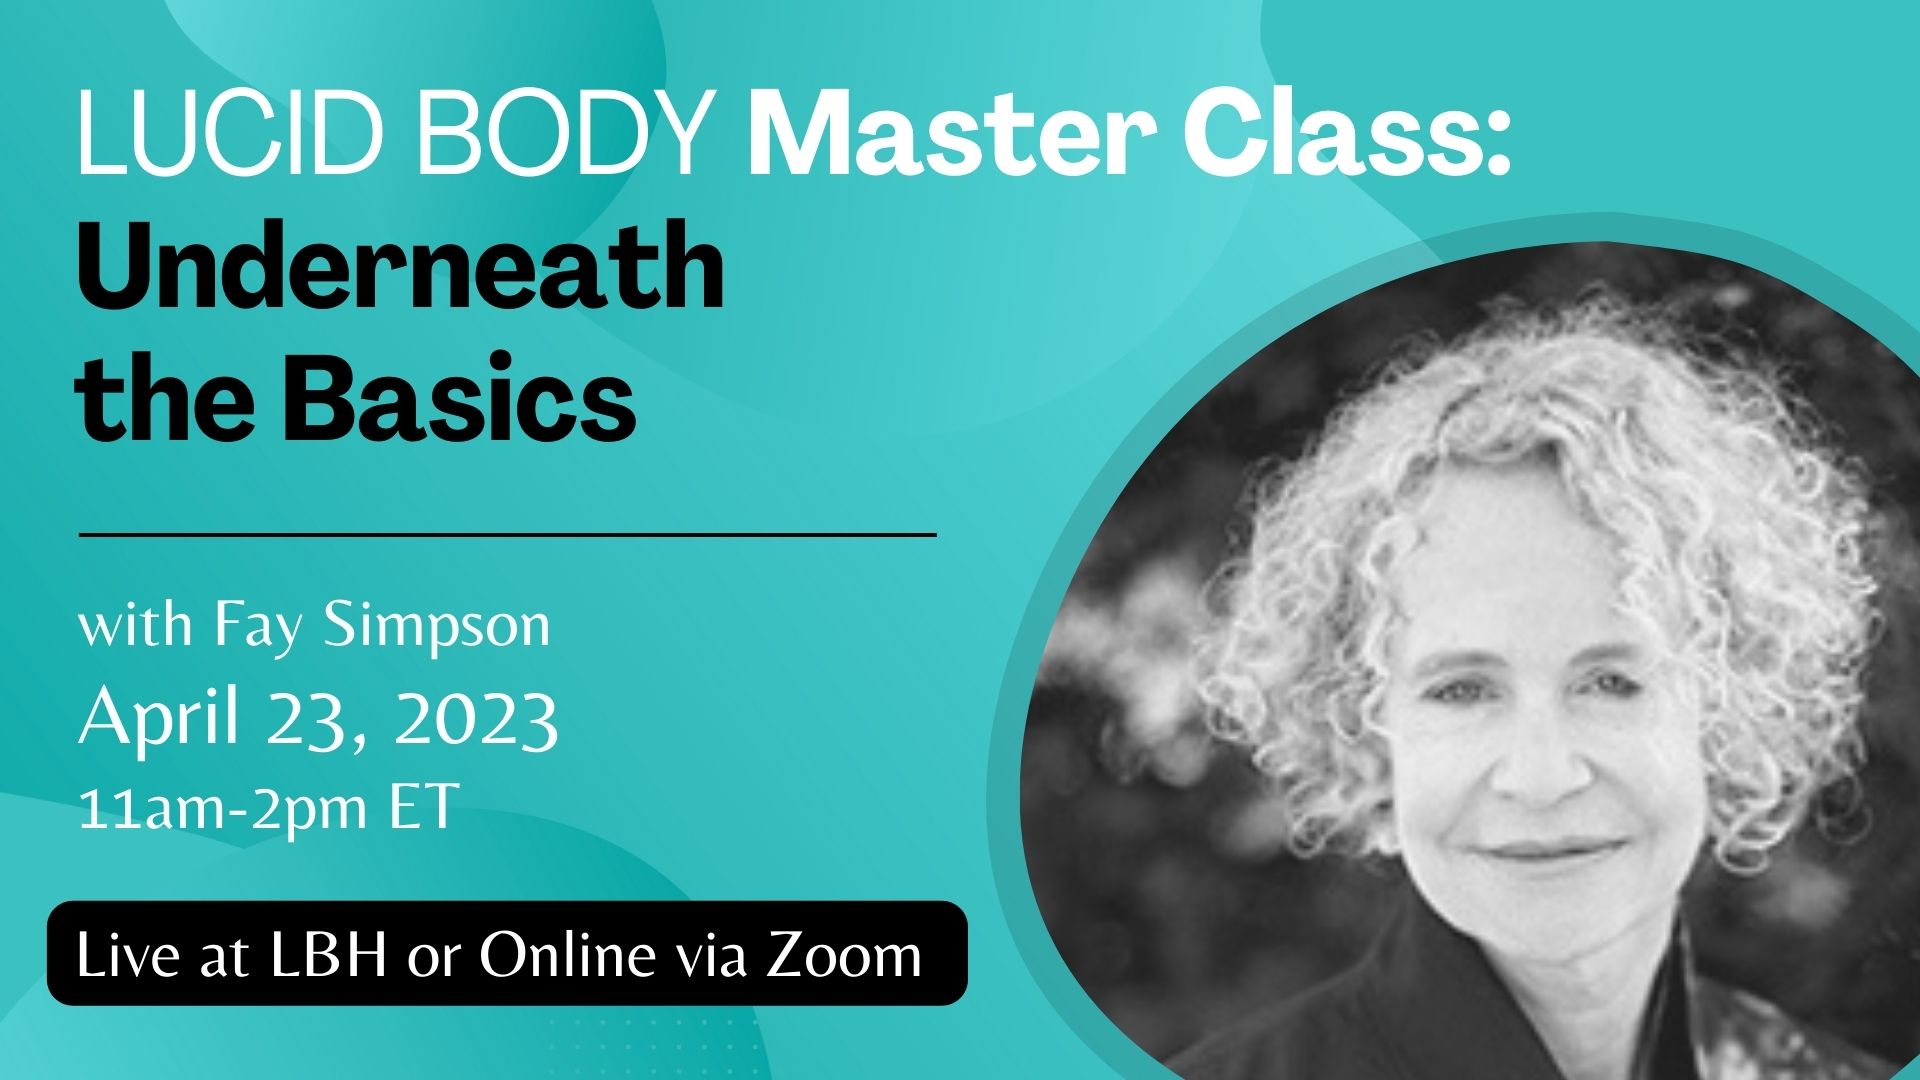 Lucid Body Master Class with Fay Simpson April 23, 2023